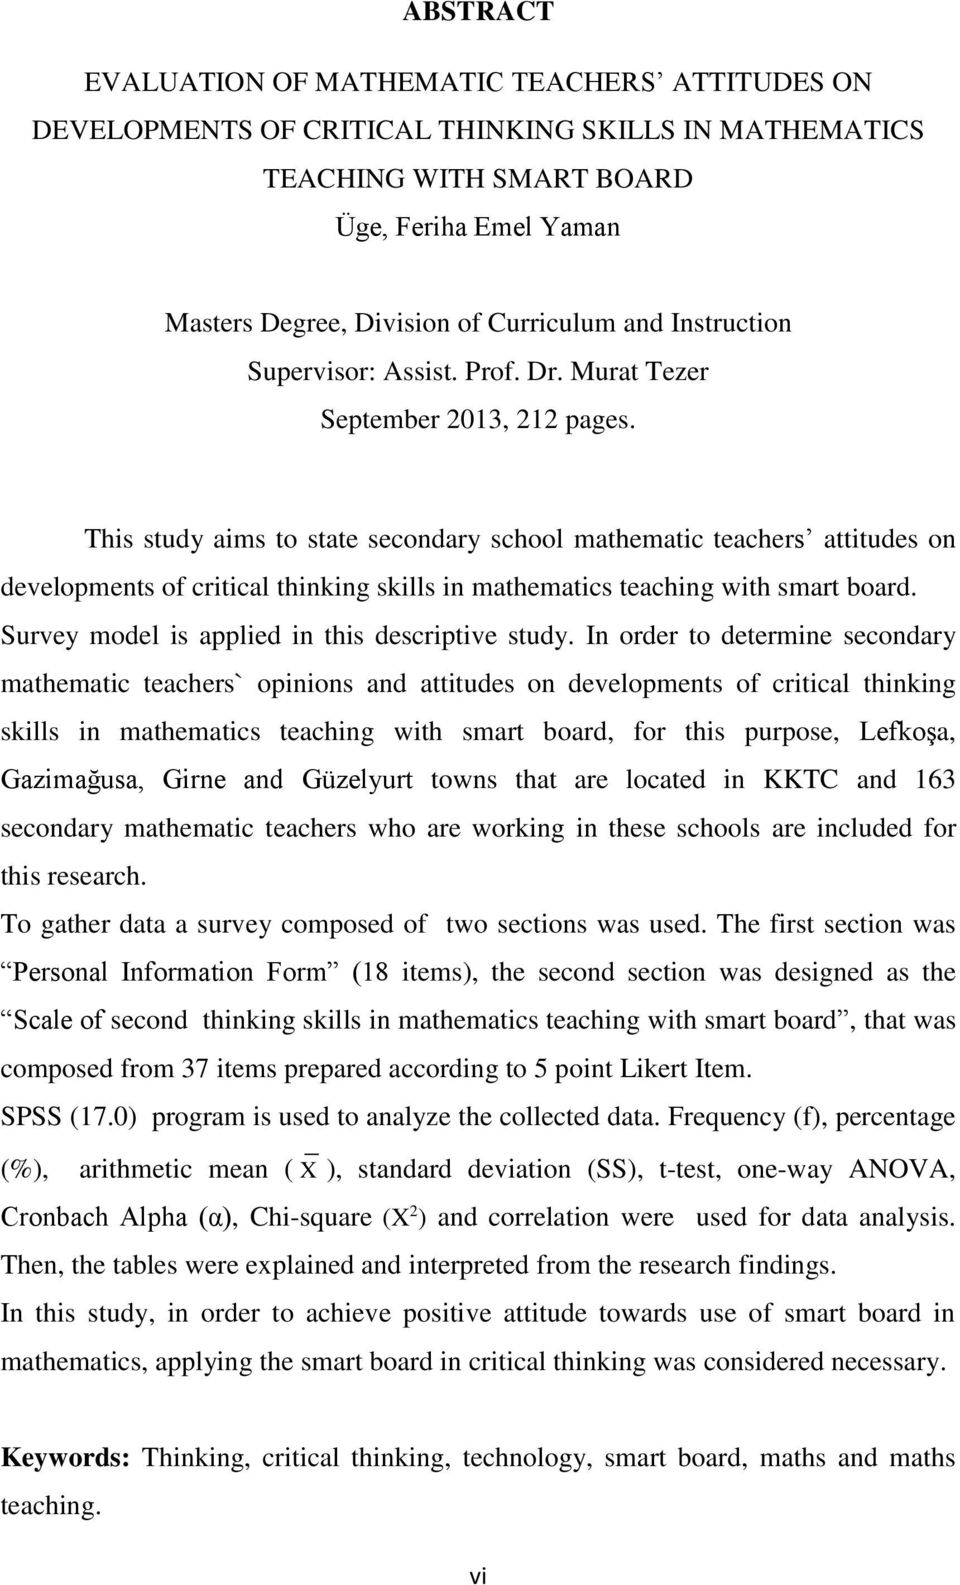 This study aims to state secondary school mathematic teachers attitudes on developments of critical thinking skills in mathematics teaching with smart board.